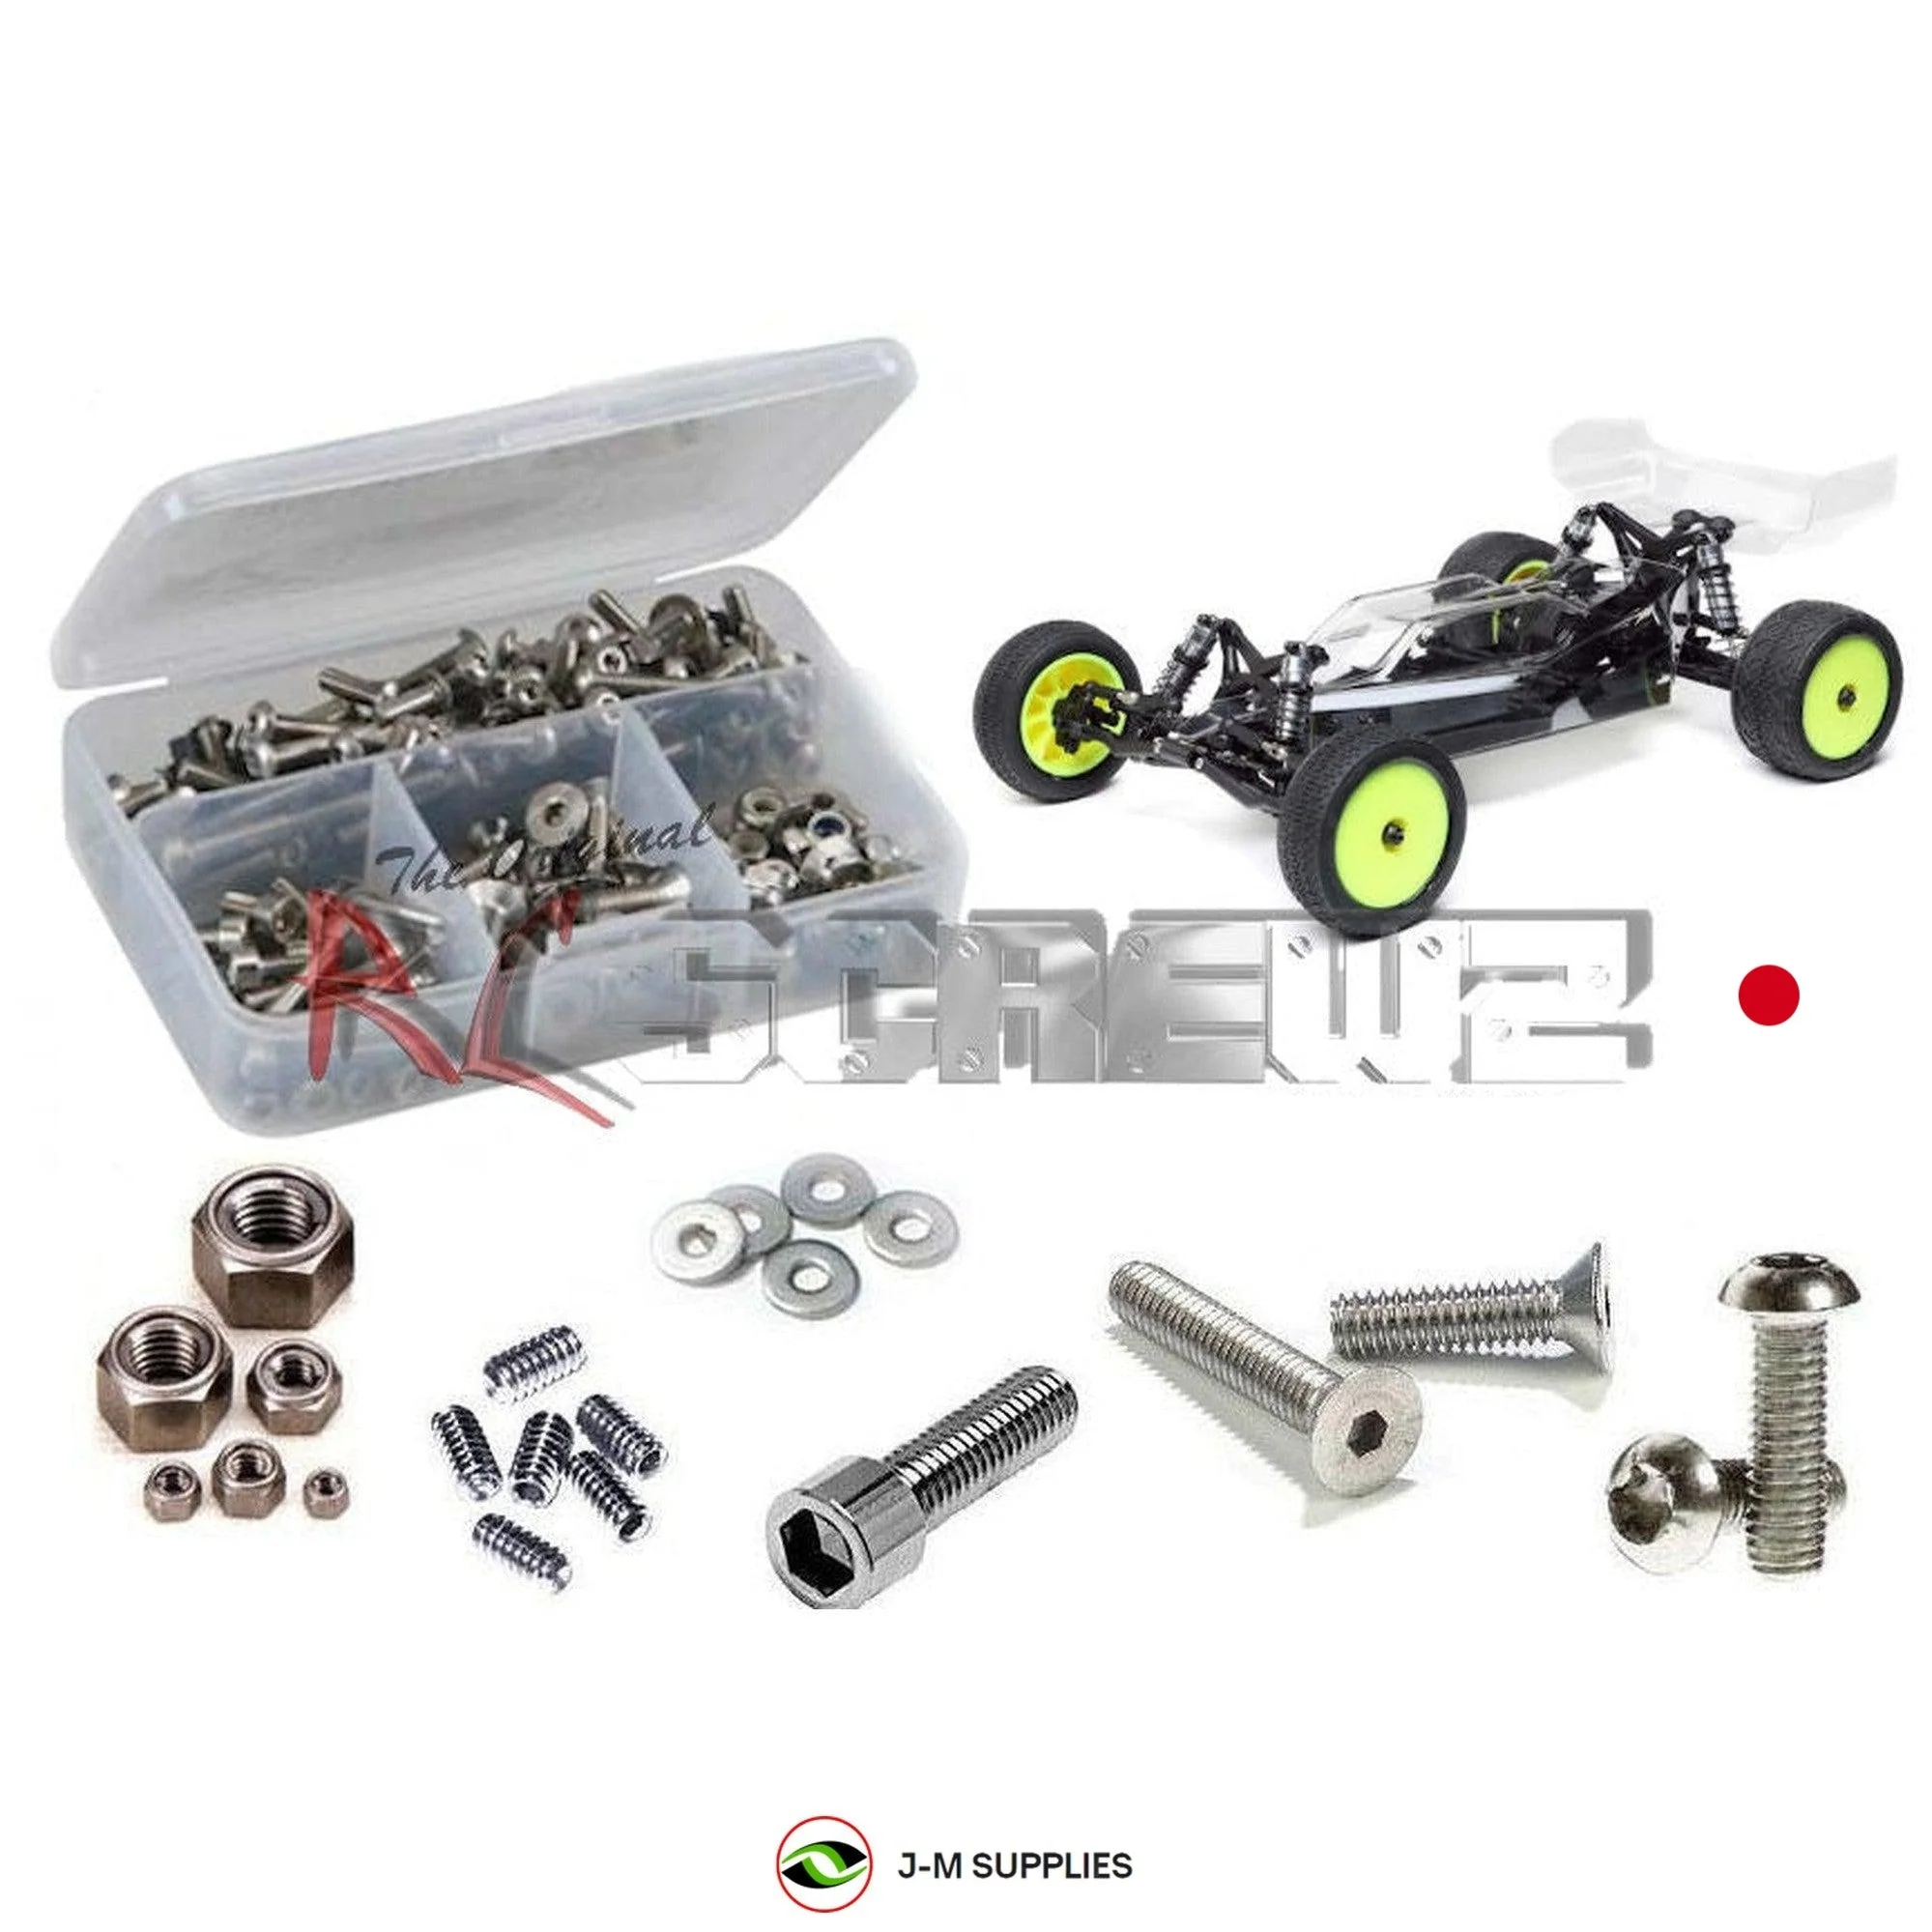 RCScrewZ Stainless Screw Kit los136 for Losi 1/16 Mini-B Pro (LOS01025) RC Buggy - Picture 1 of 12